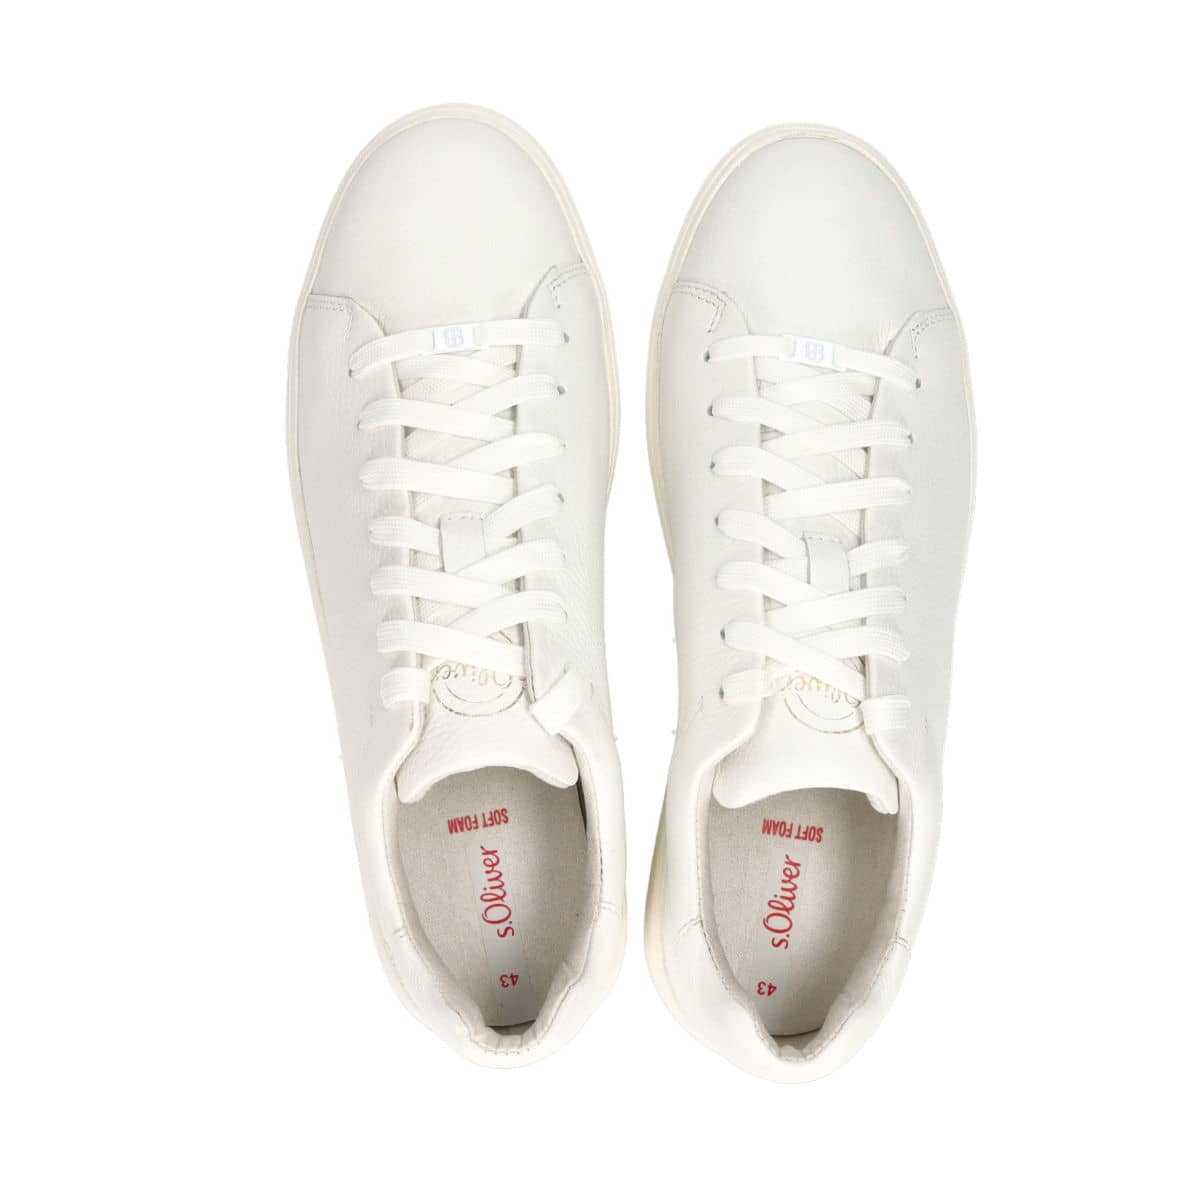 S.Oliver Unisex Leather Sneakers